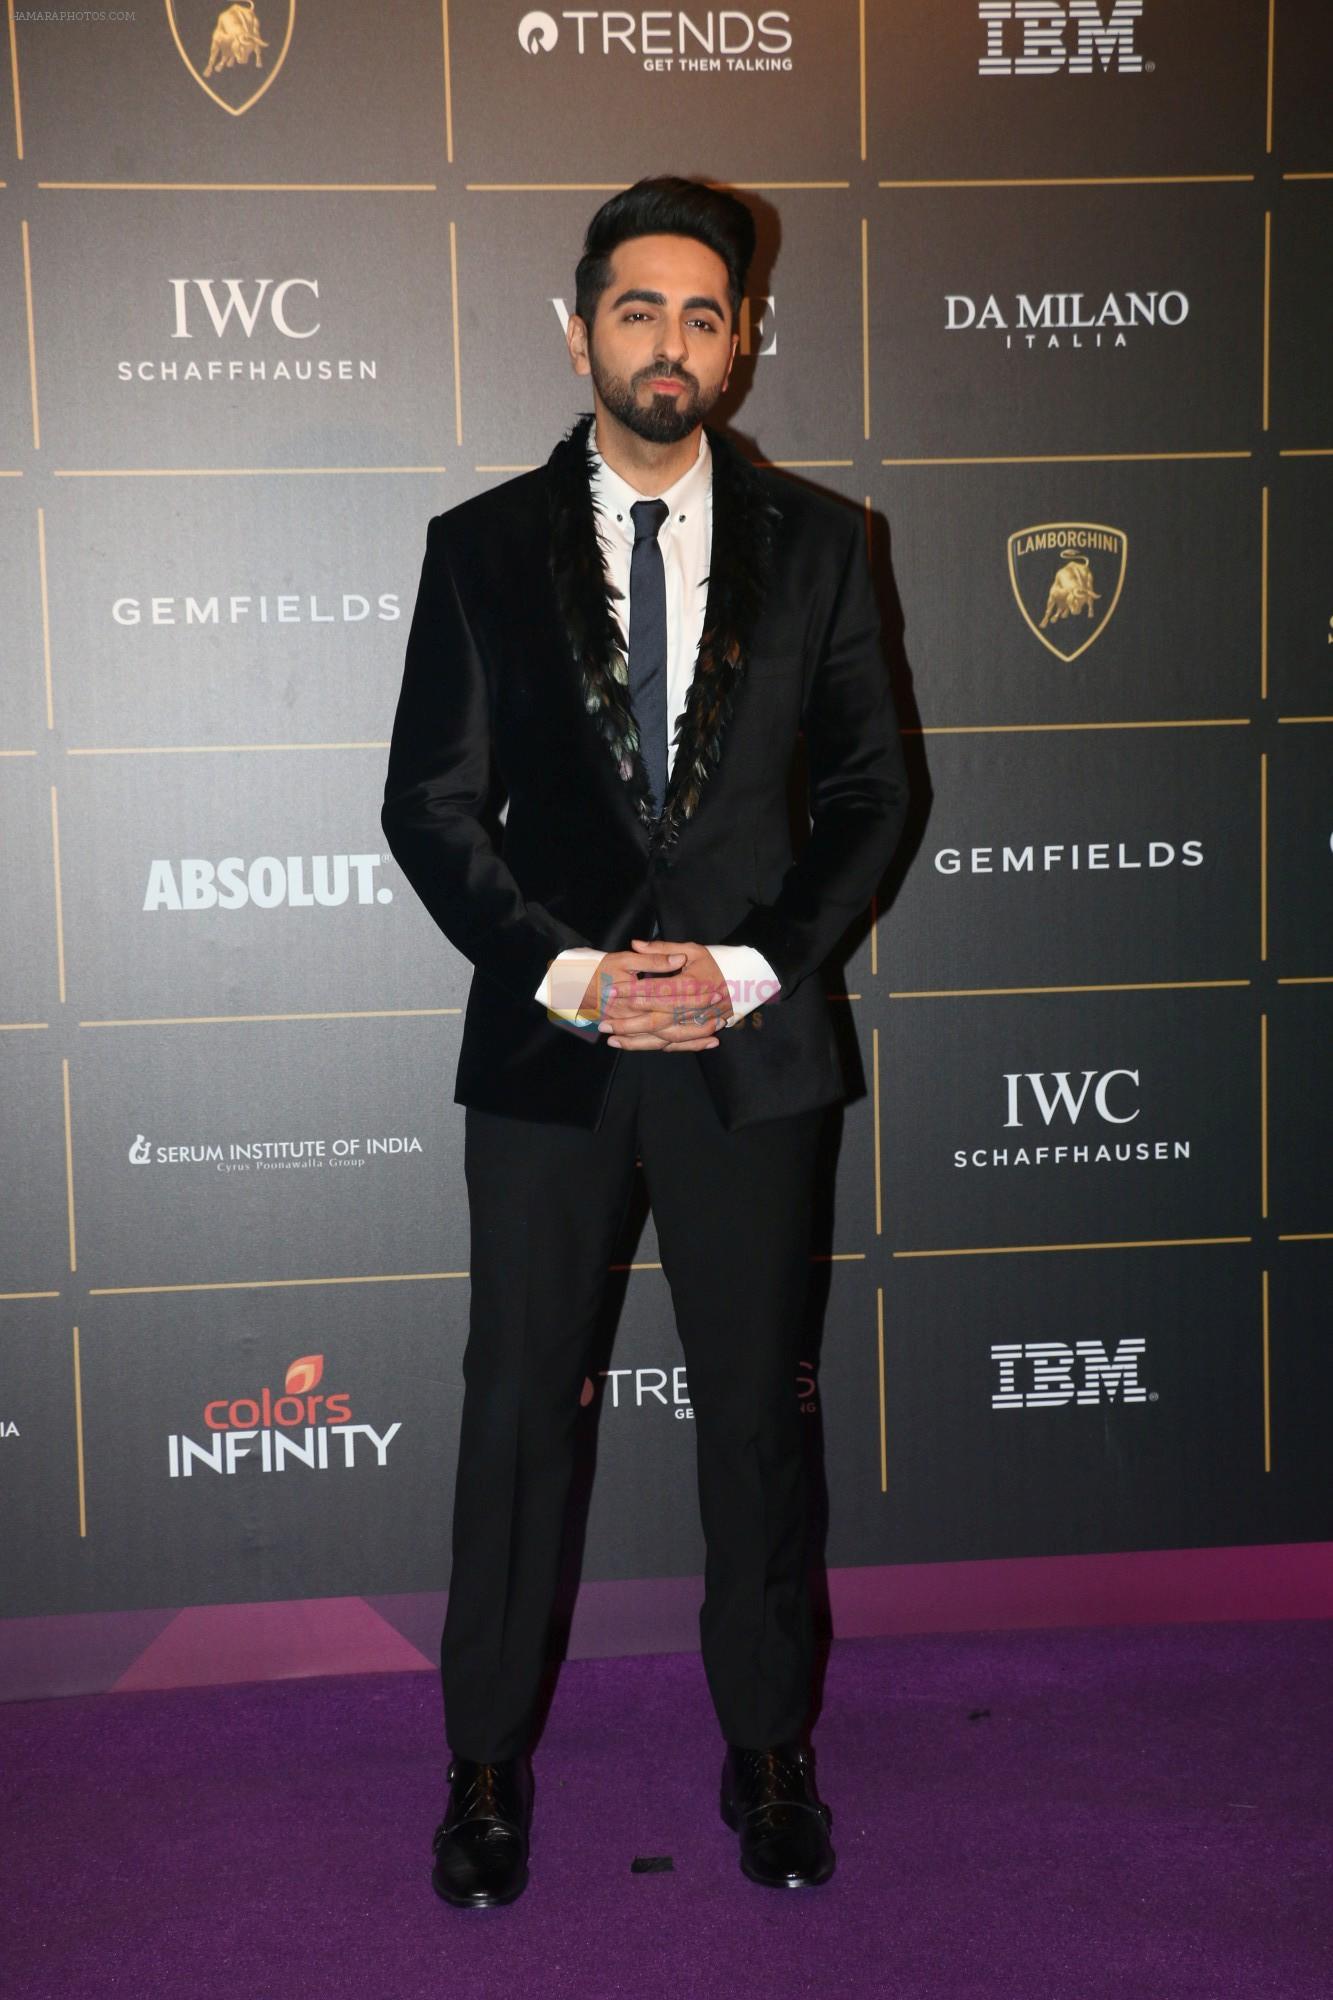 Ayushmann Khurrana at The Vogue Women Of The Year Awards 2018 on 27th Oct 2018